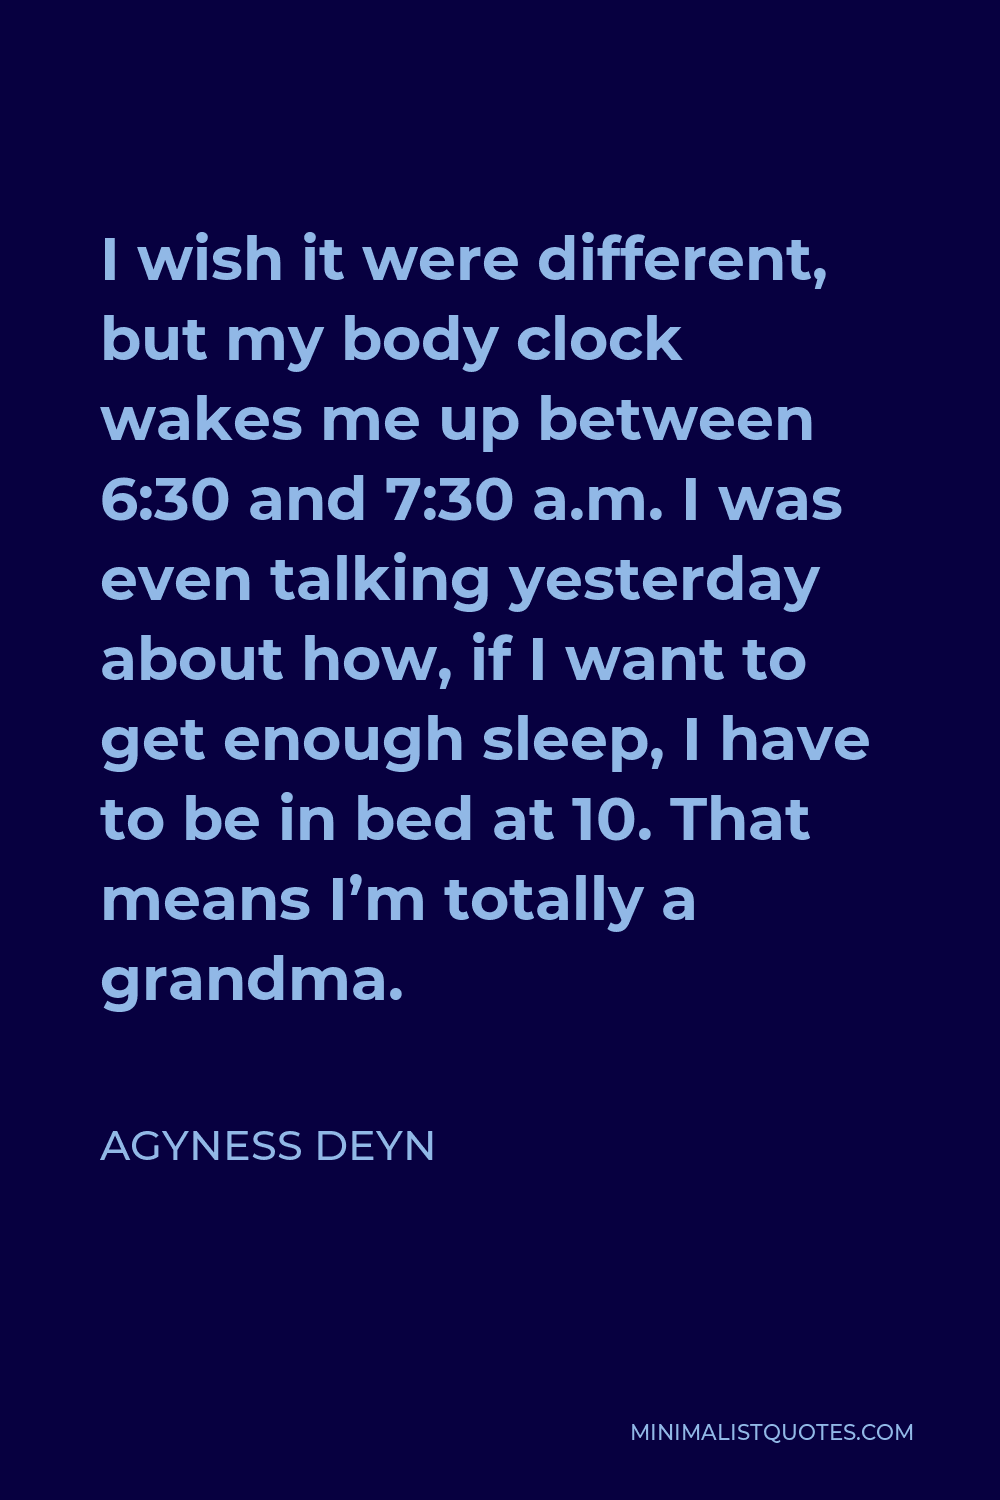 Agyness Deyn Quote - I wish it were different, but my body clock wakes me up between 6:30 and 7:30 a.m. I was even talking yesterday about how, if I want to get enough sleep, I have to be in bed at 10. That means I’m totally a grandma.